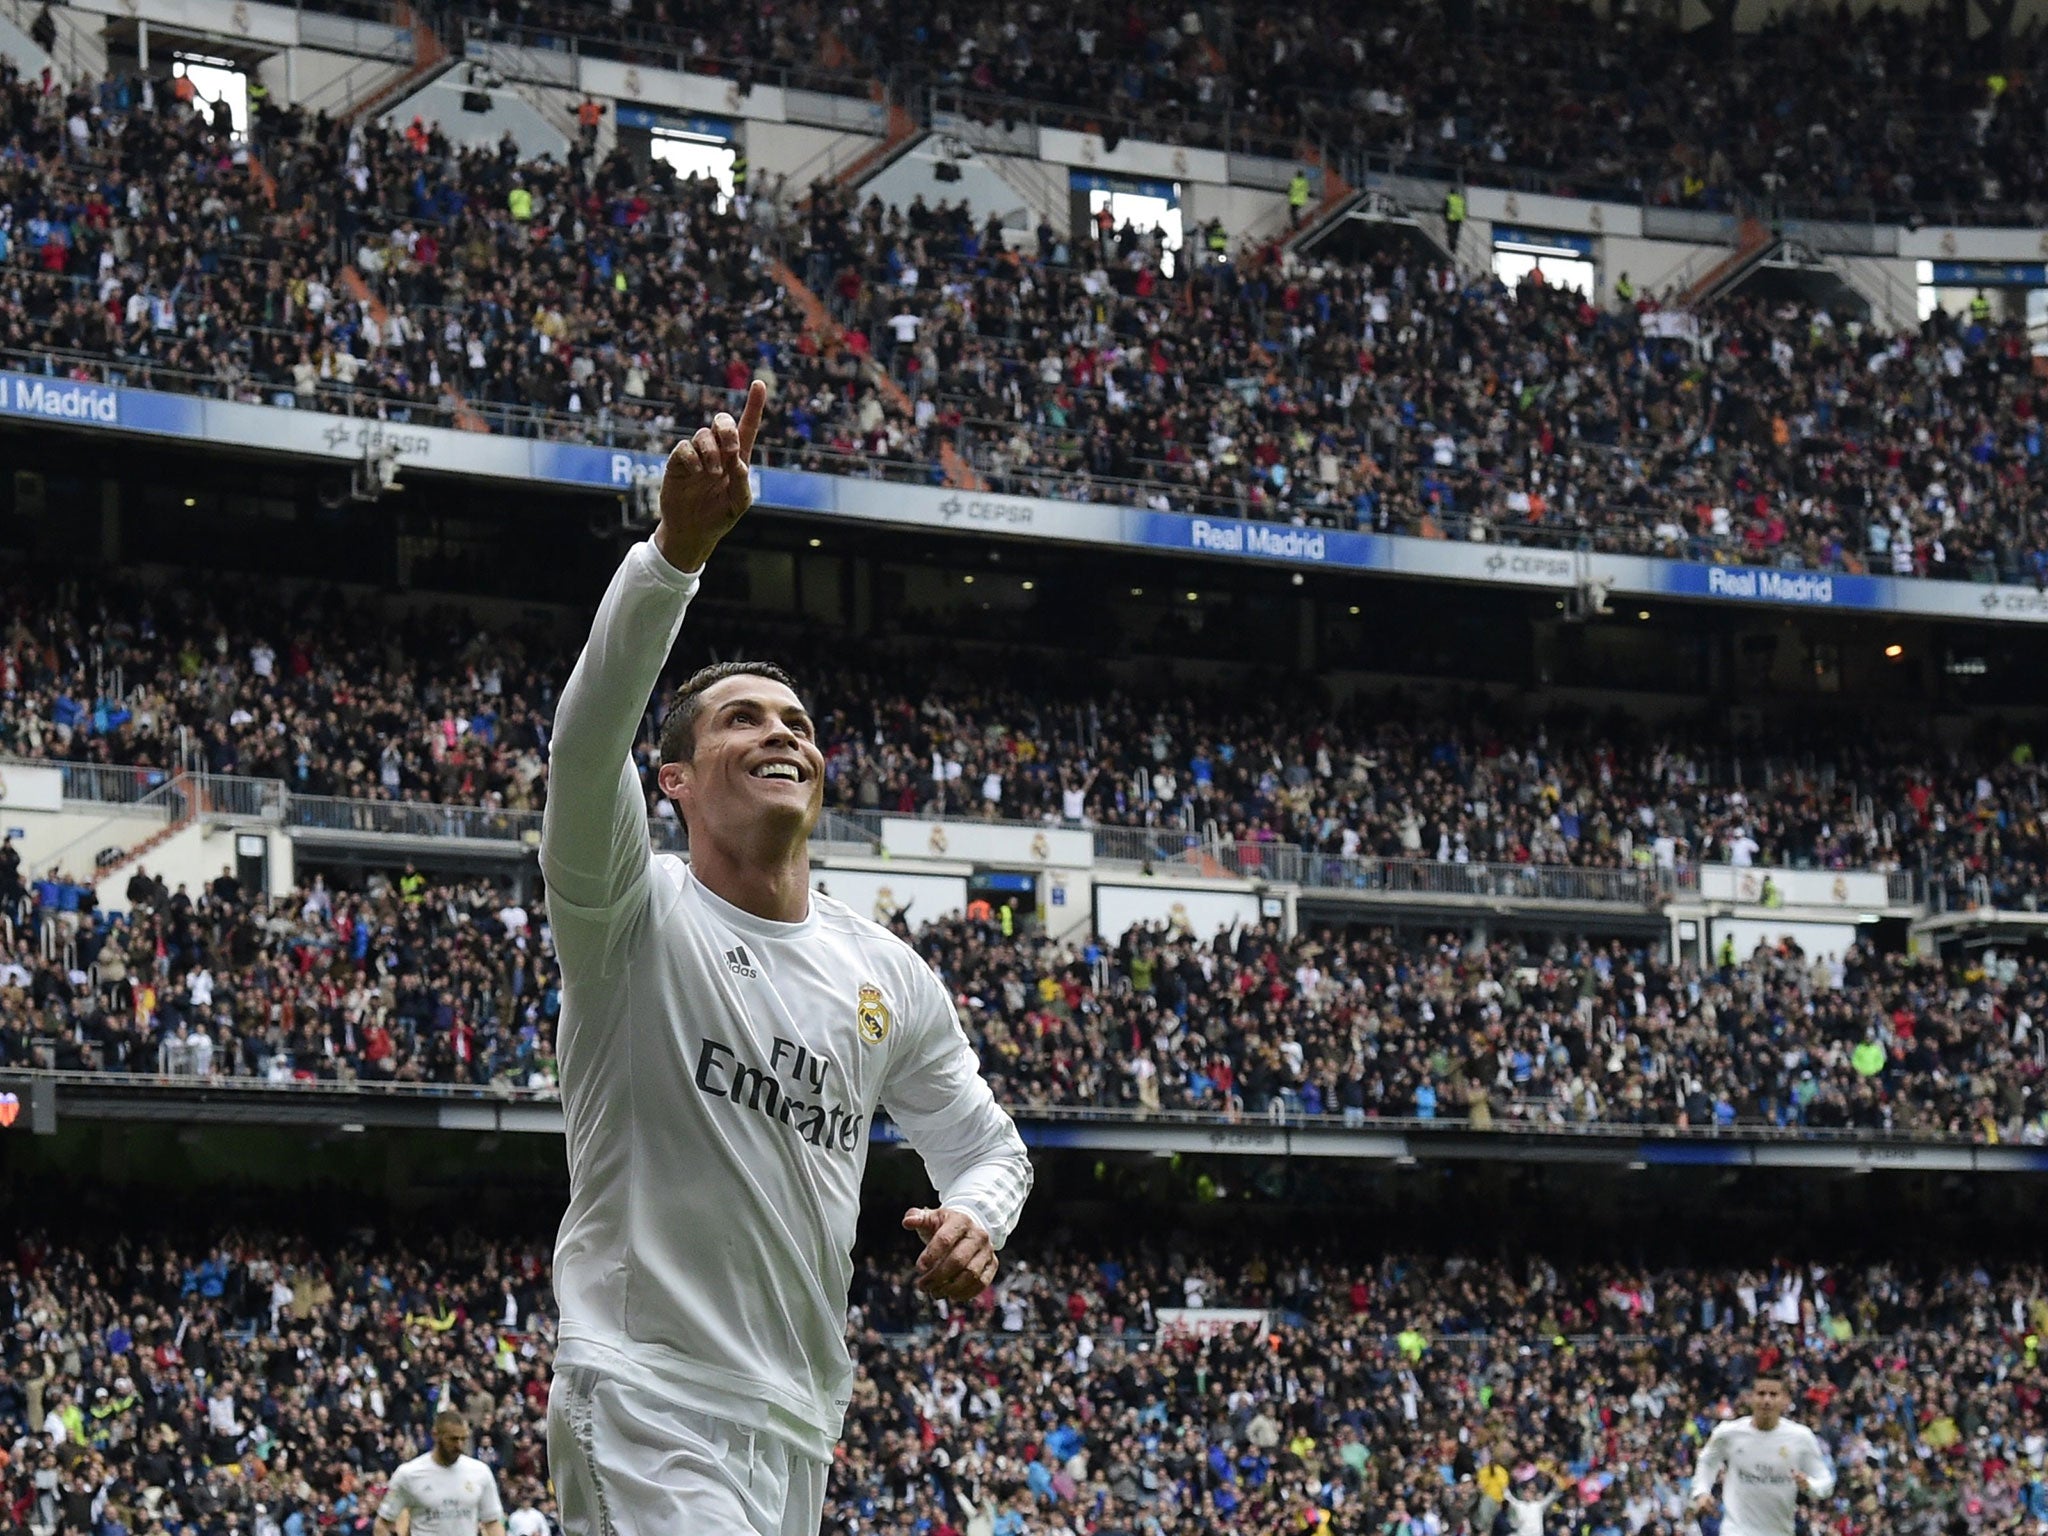 Ronaldo is once again crowned the winner of the Ballon d'Or